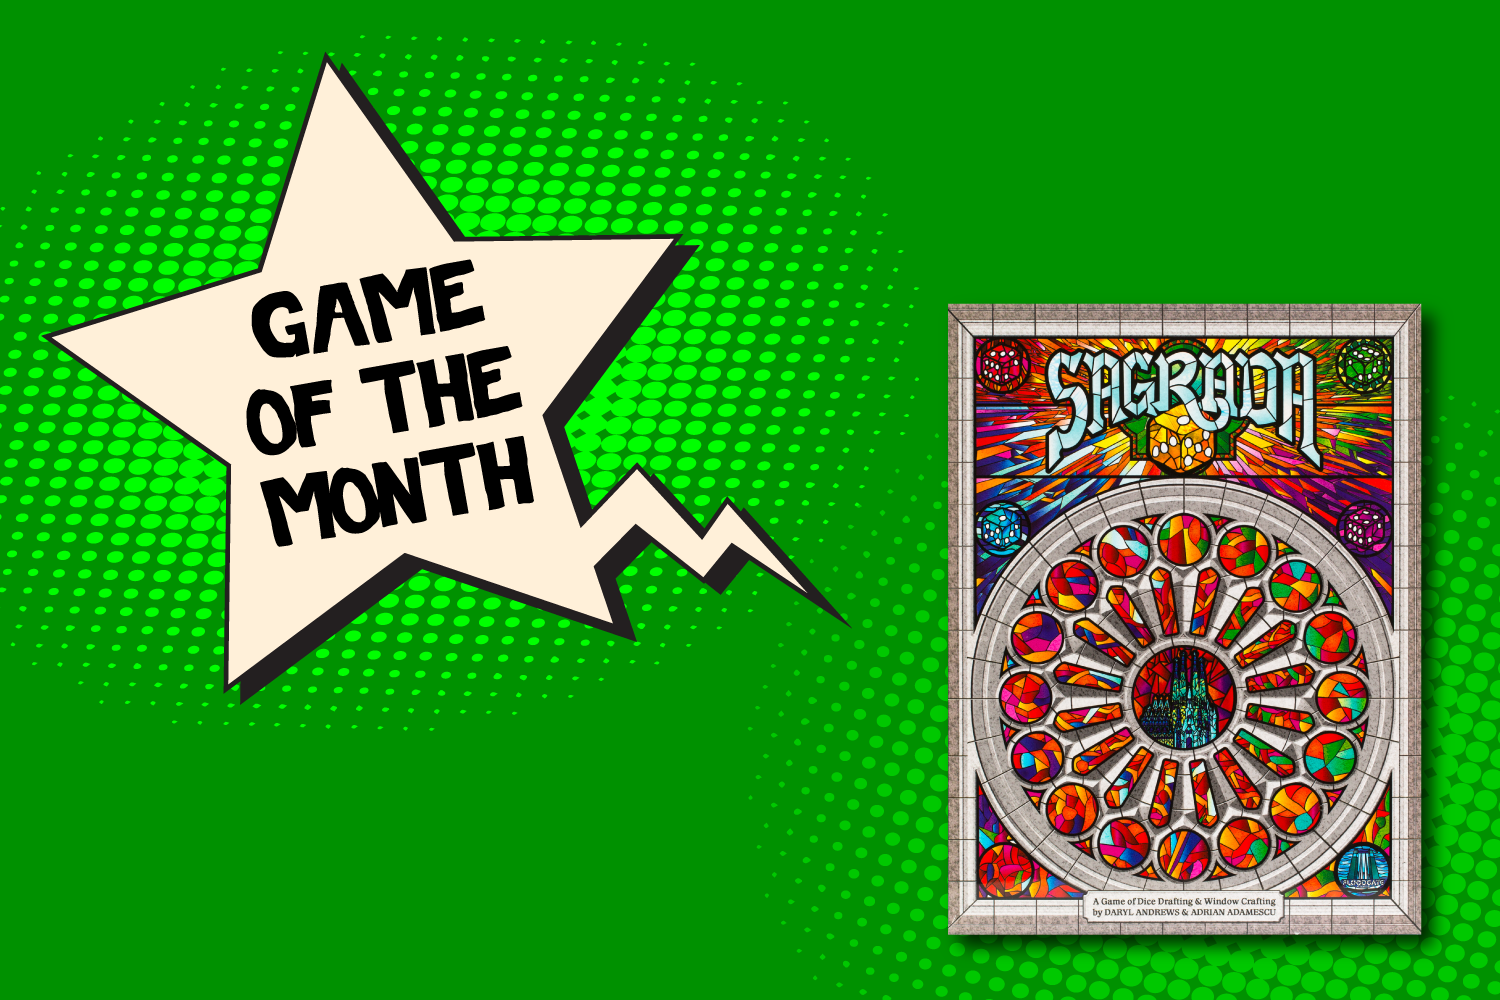 Sagrada-Game-of-the-Month